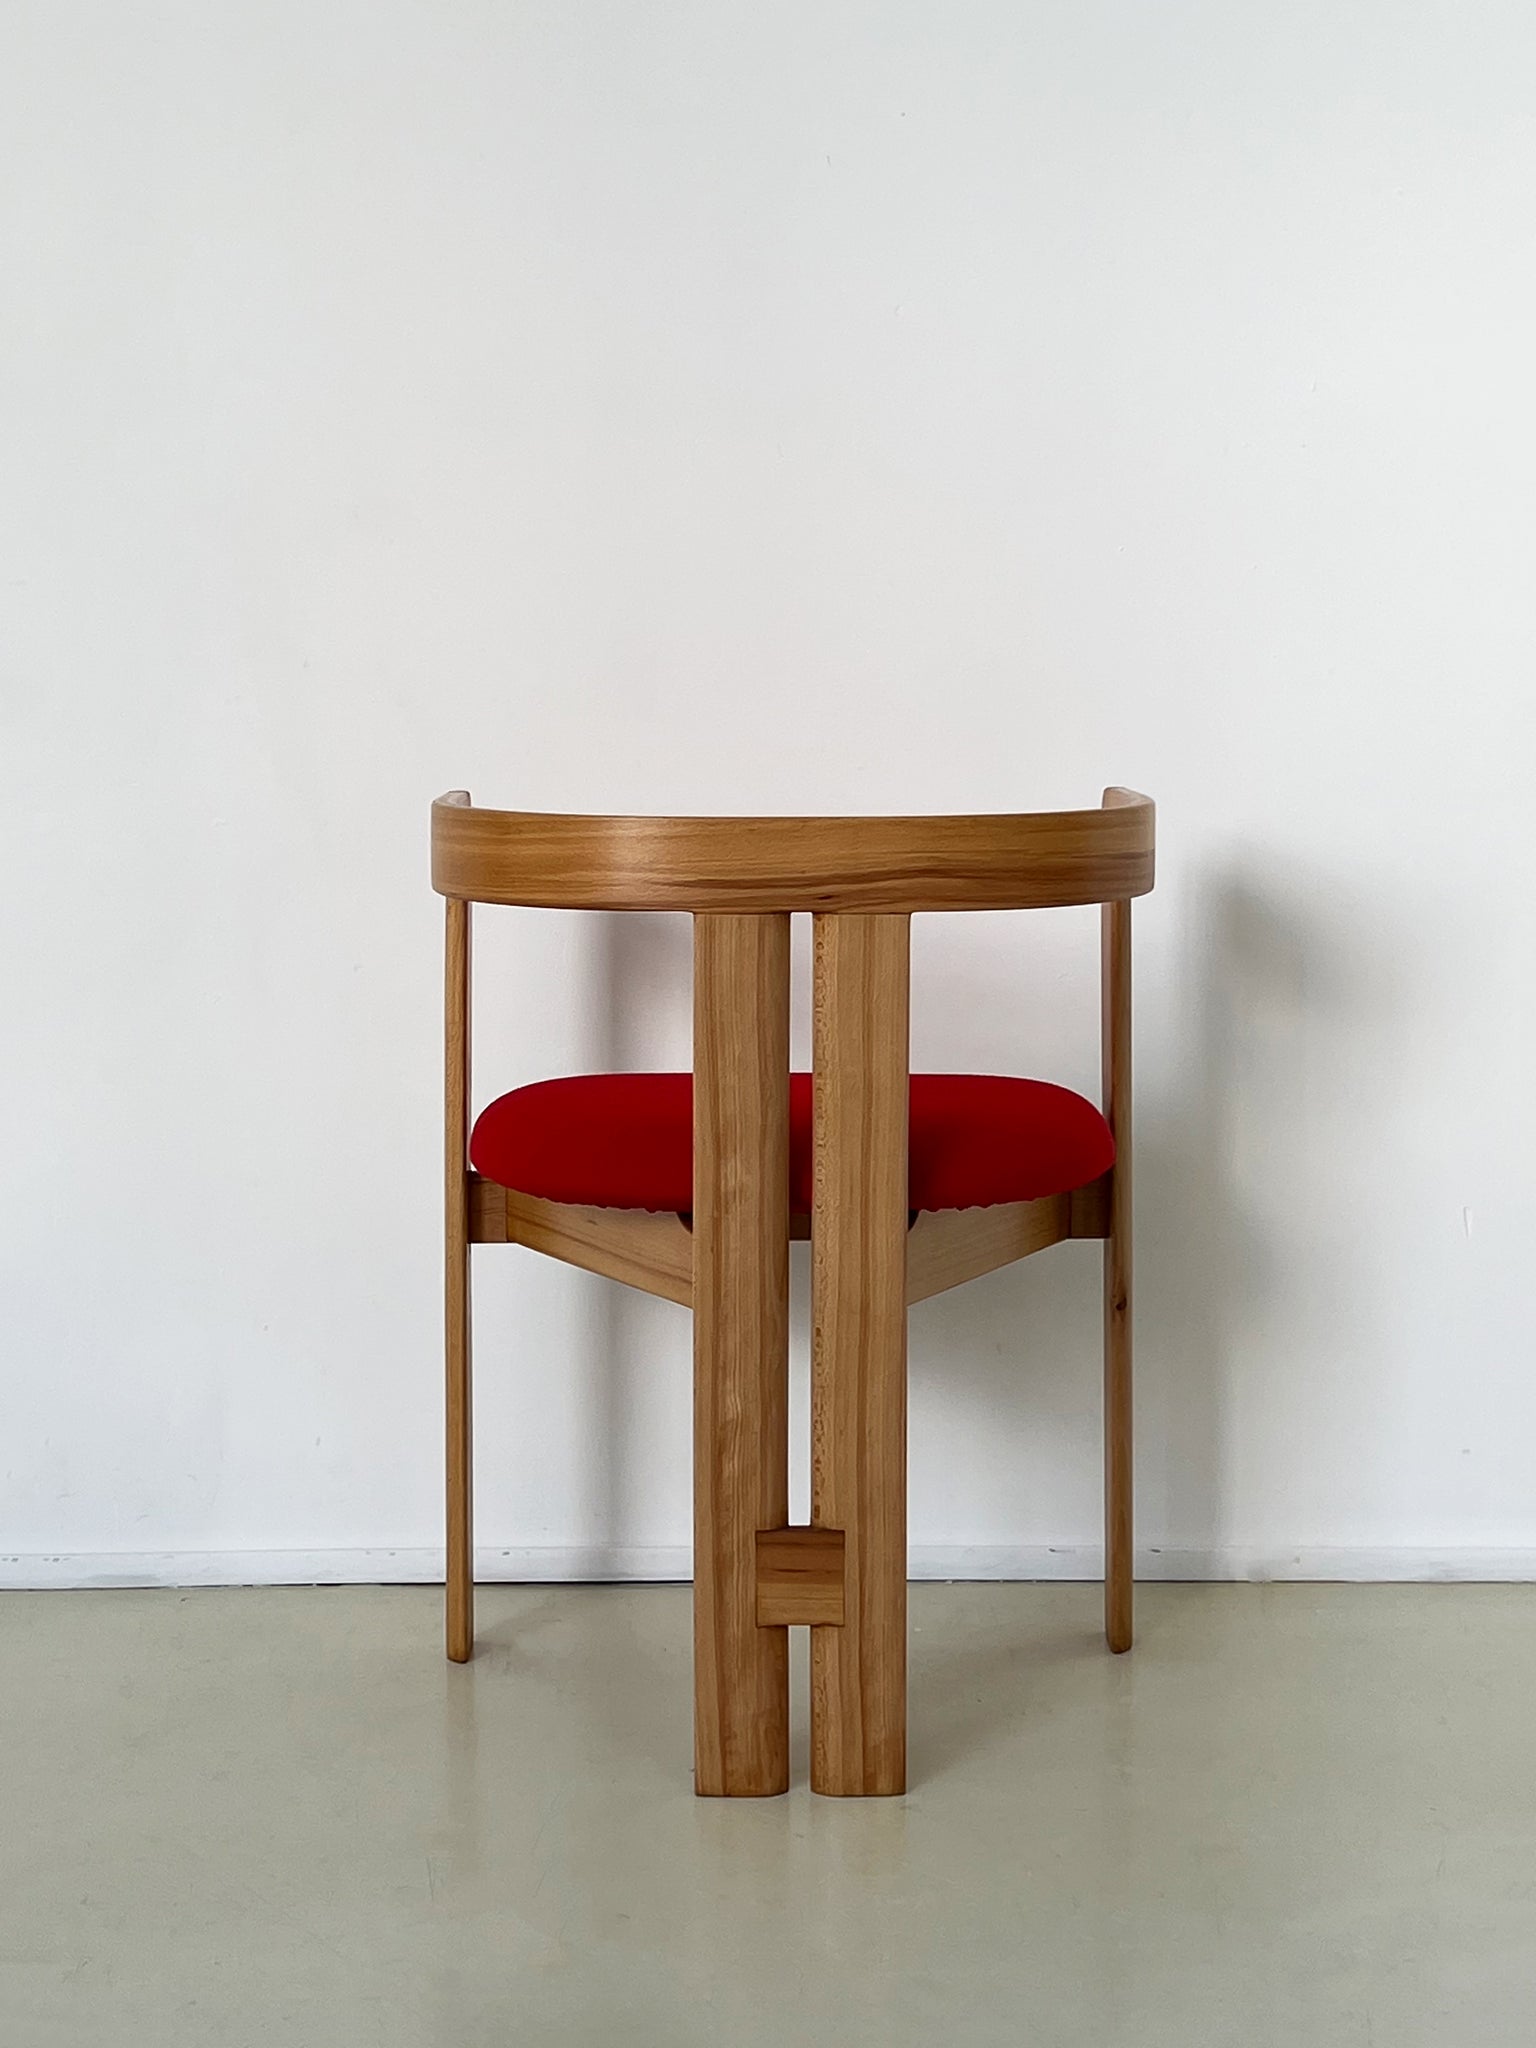 1959 Tobia Scarpa Pigreco Chair in Beechwood, Italy